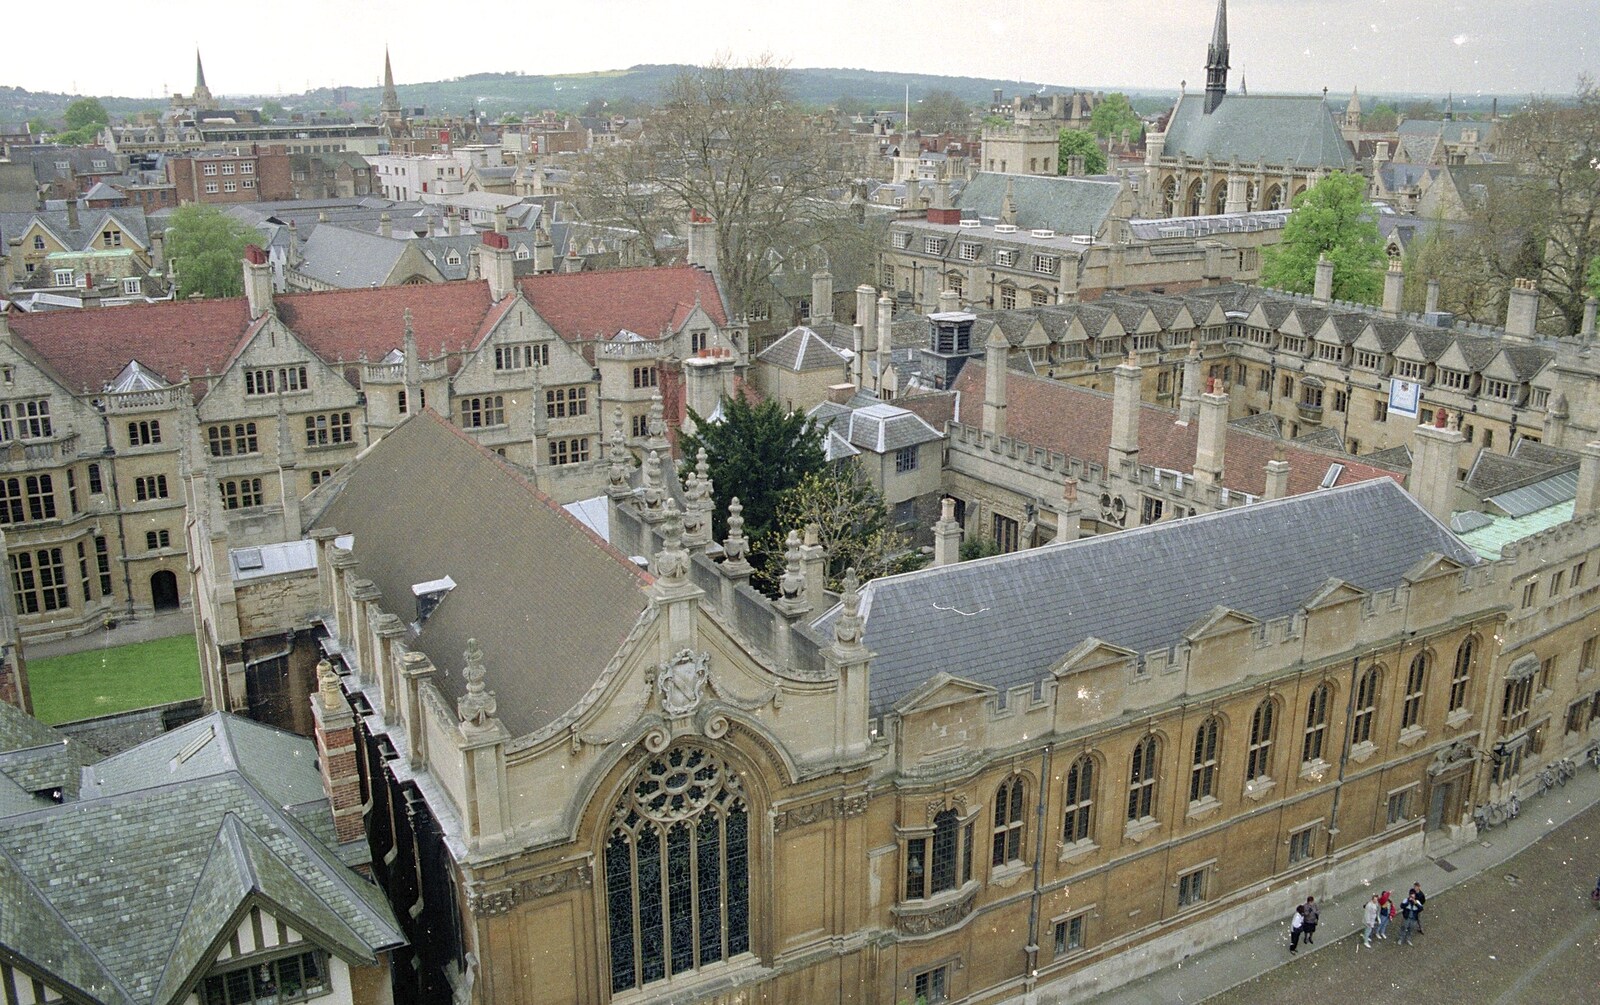 Hamish's Oxford Party, Oxfordshire - 25th April 1992: More Oxford colleges